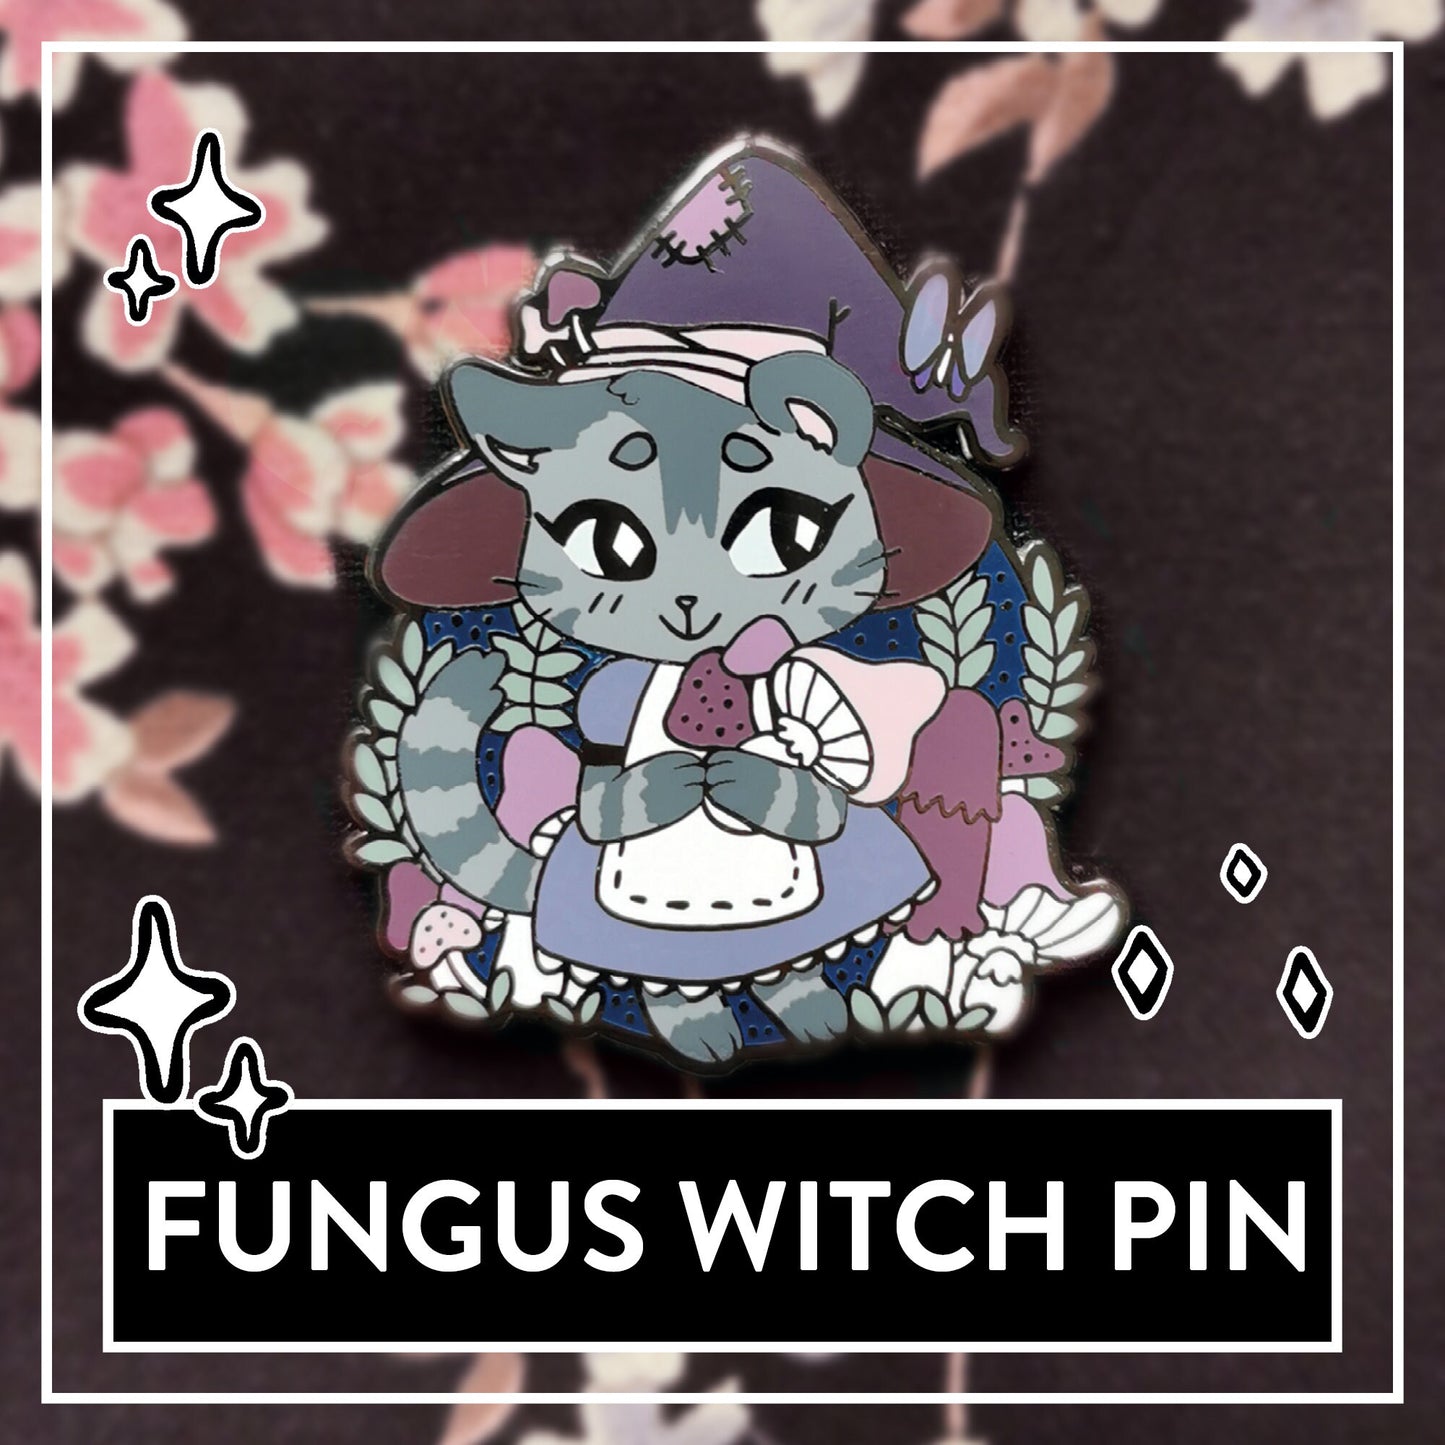 Myuna's Fungus Witch Pin - Little Witch Acatemia Cat Witch Pins - Cute Mushroom Cat Witch talismans, Kawaii Witchy Occult Hard Enamel Pins